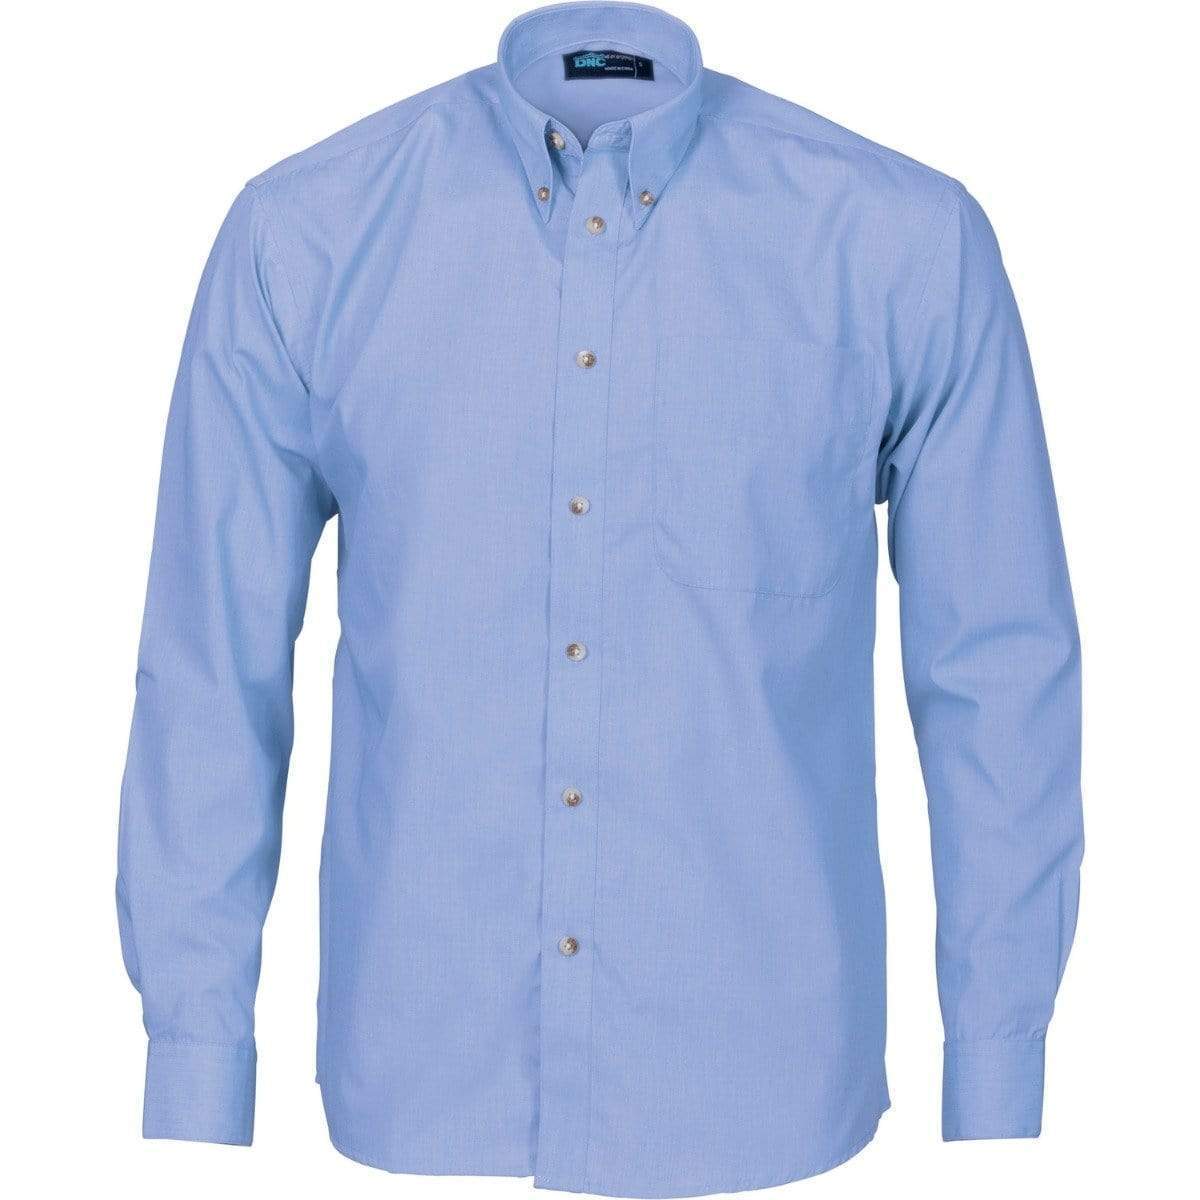 Dnc Workwear Polyester Cotton Chambray Long Sleeve Business Shirt - 4122 Work Wear DNC Workwear Chambray S 